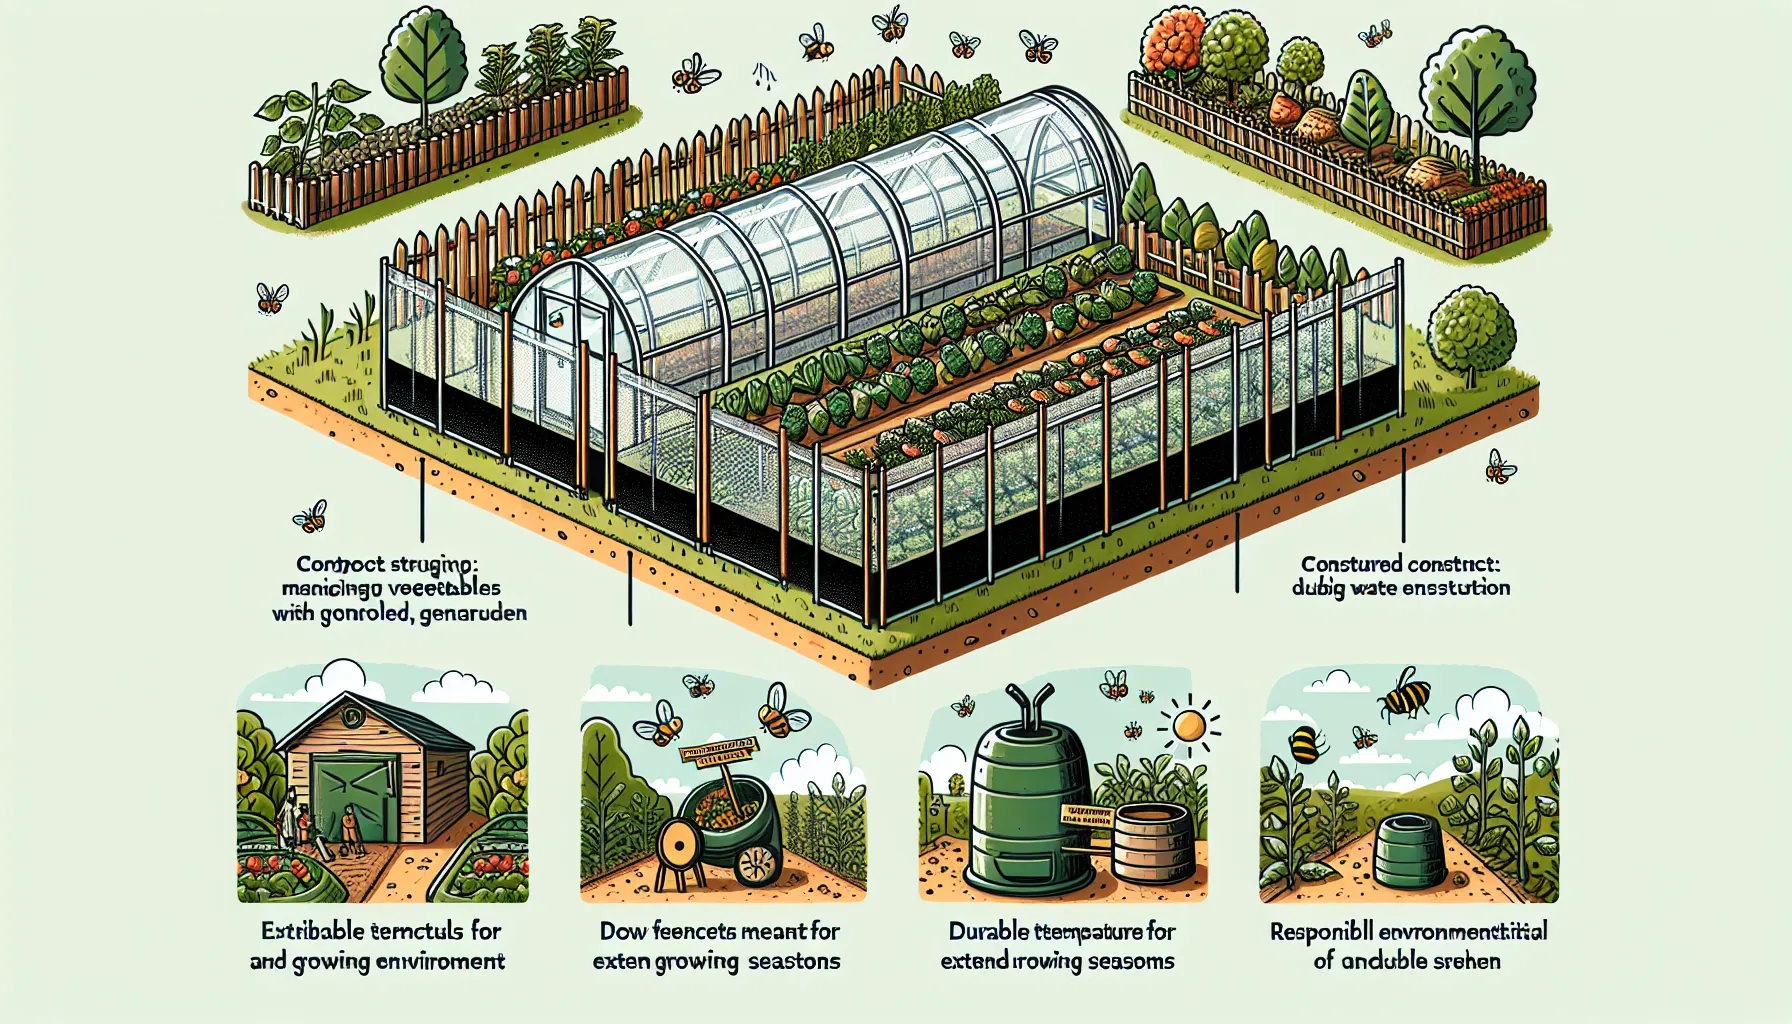 An isometric illustration of a fully enclosed vegetable garden with various sections including a greenhouse, raised beds, compost bins, and water barrels surrounded by fencing, with annotations on sustainable practices.